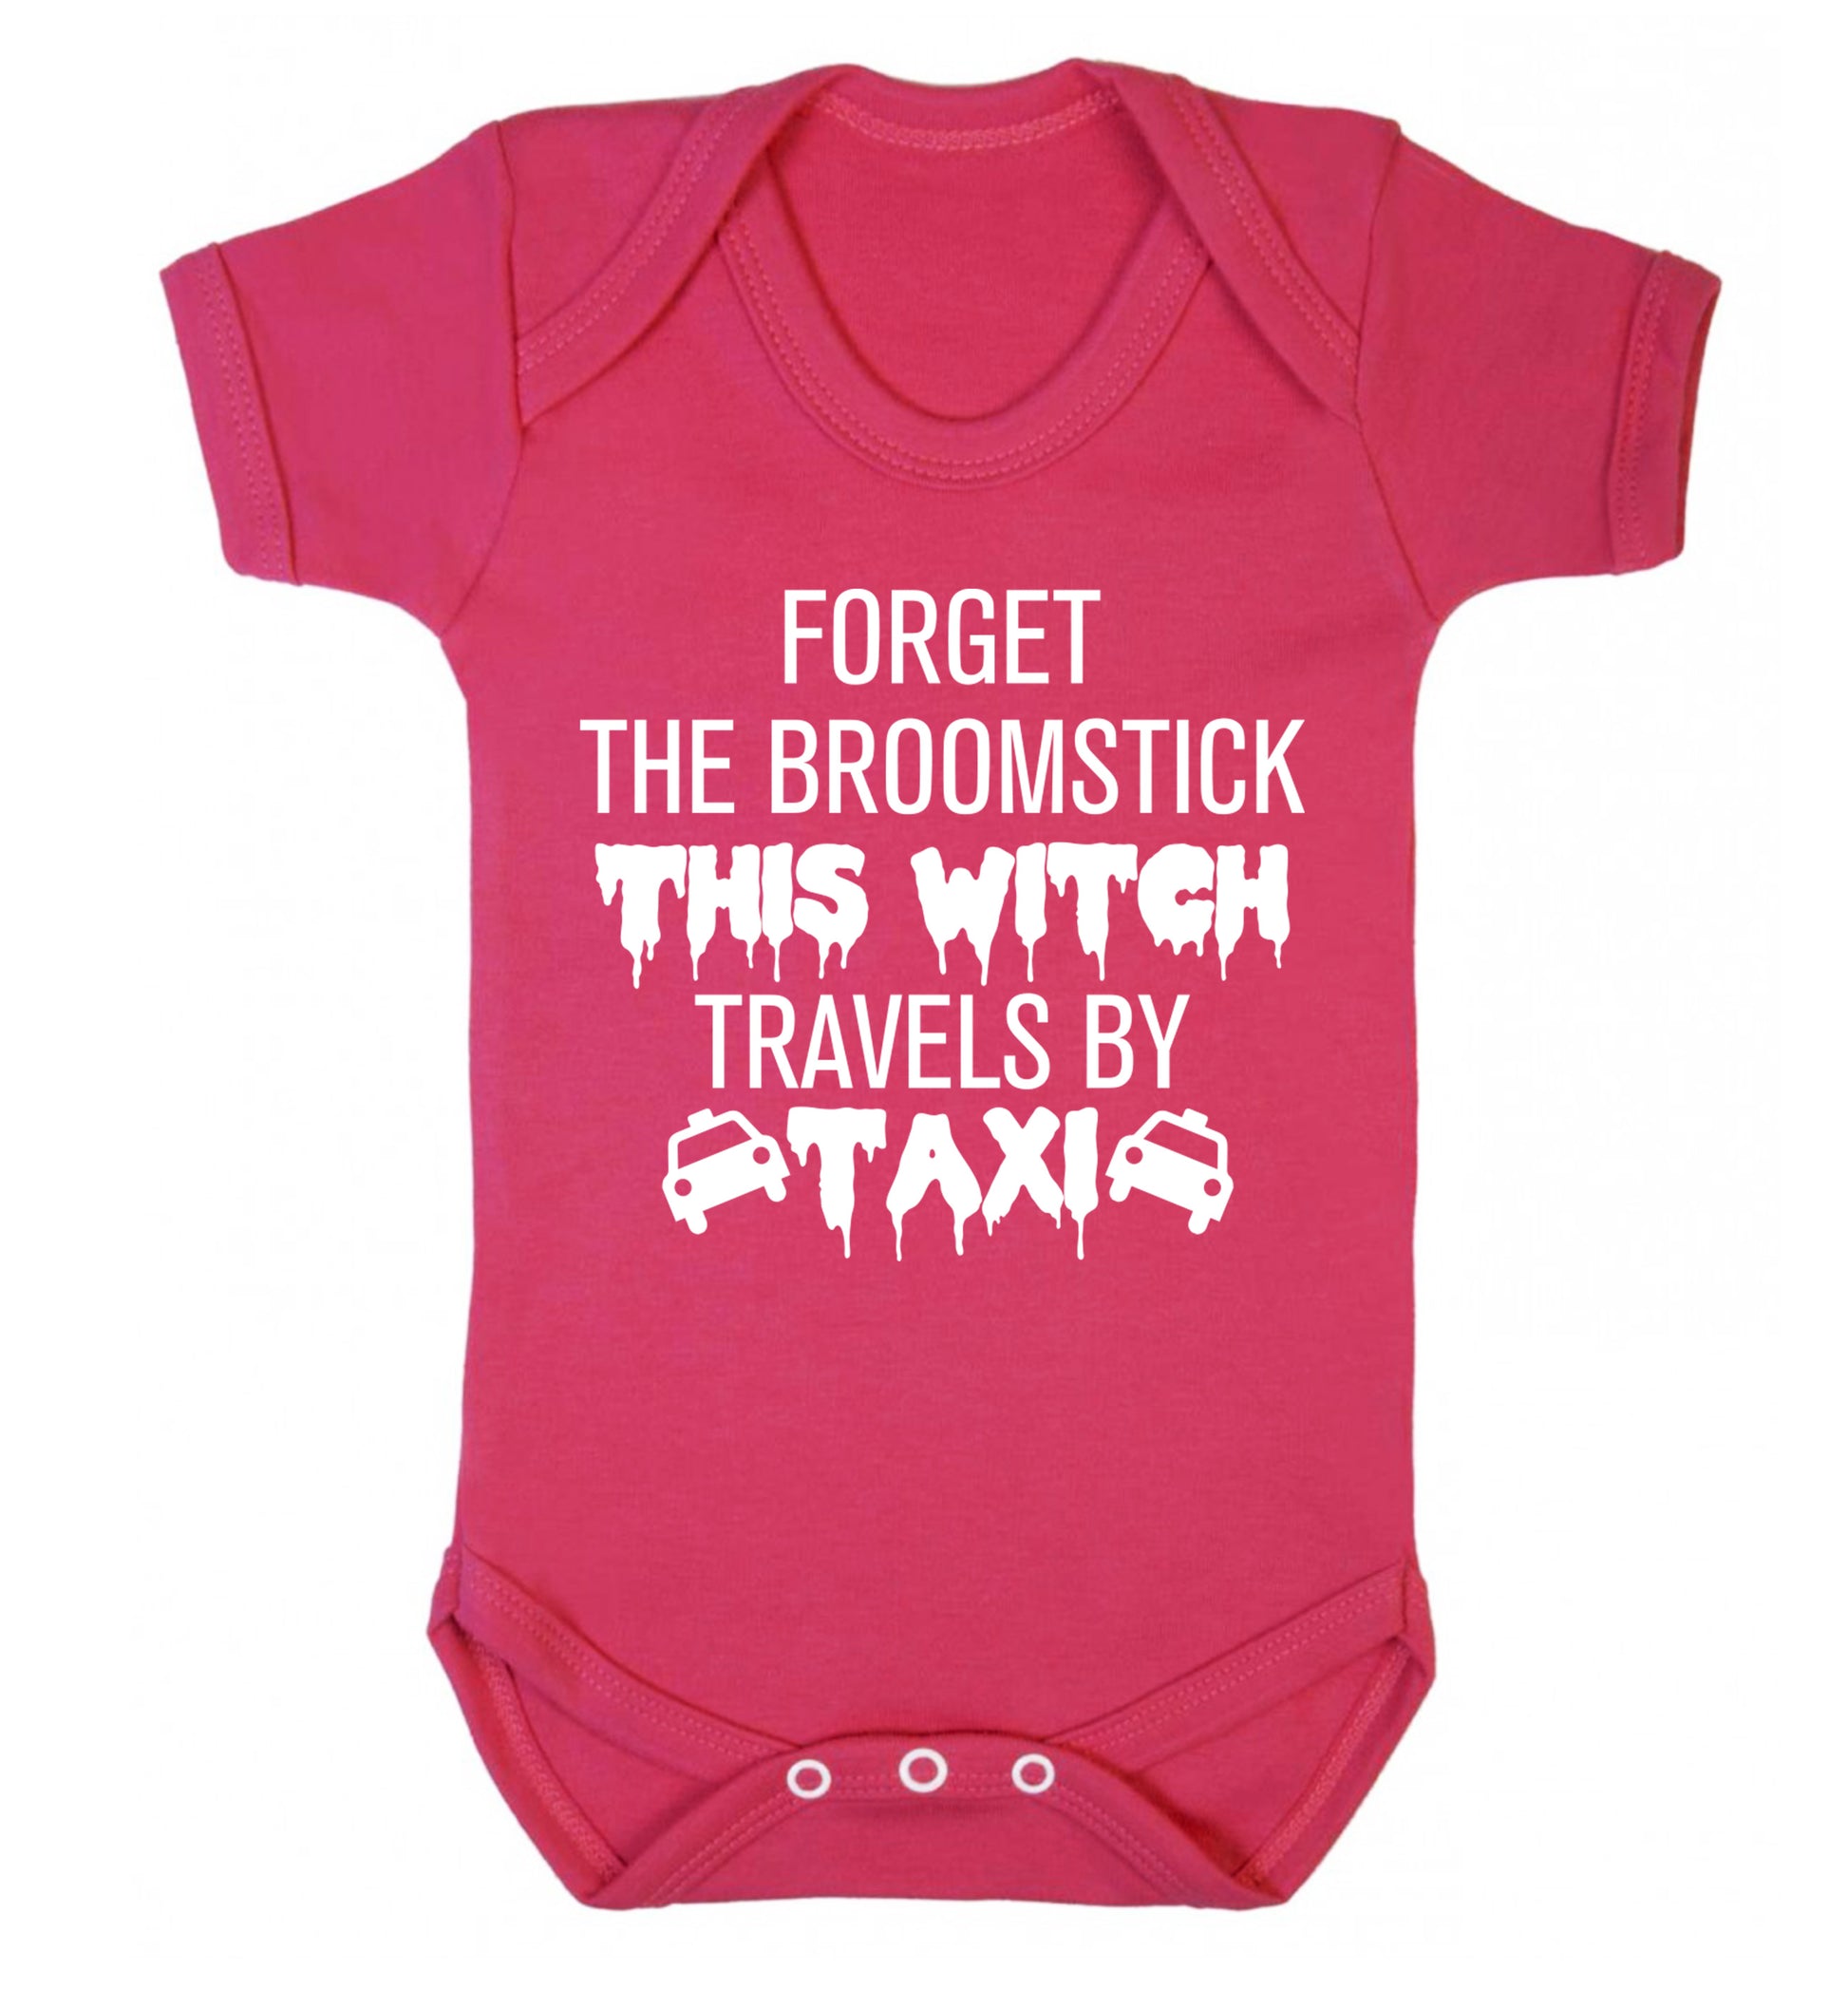 Forget the broomstick this witch travels by taxi Baby Vest dark pink 18-24 months